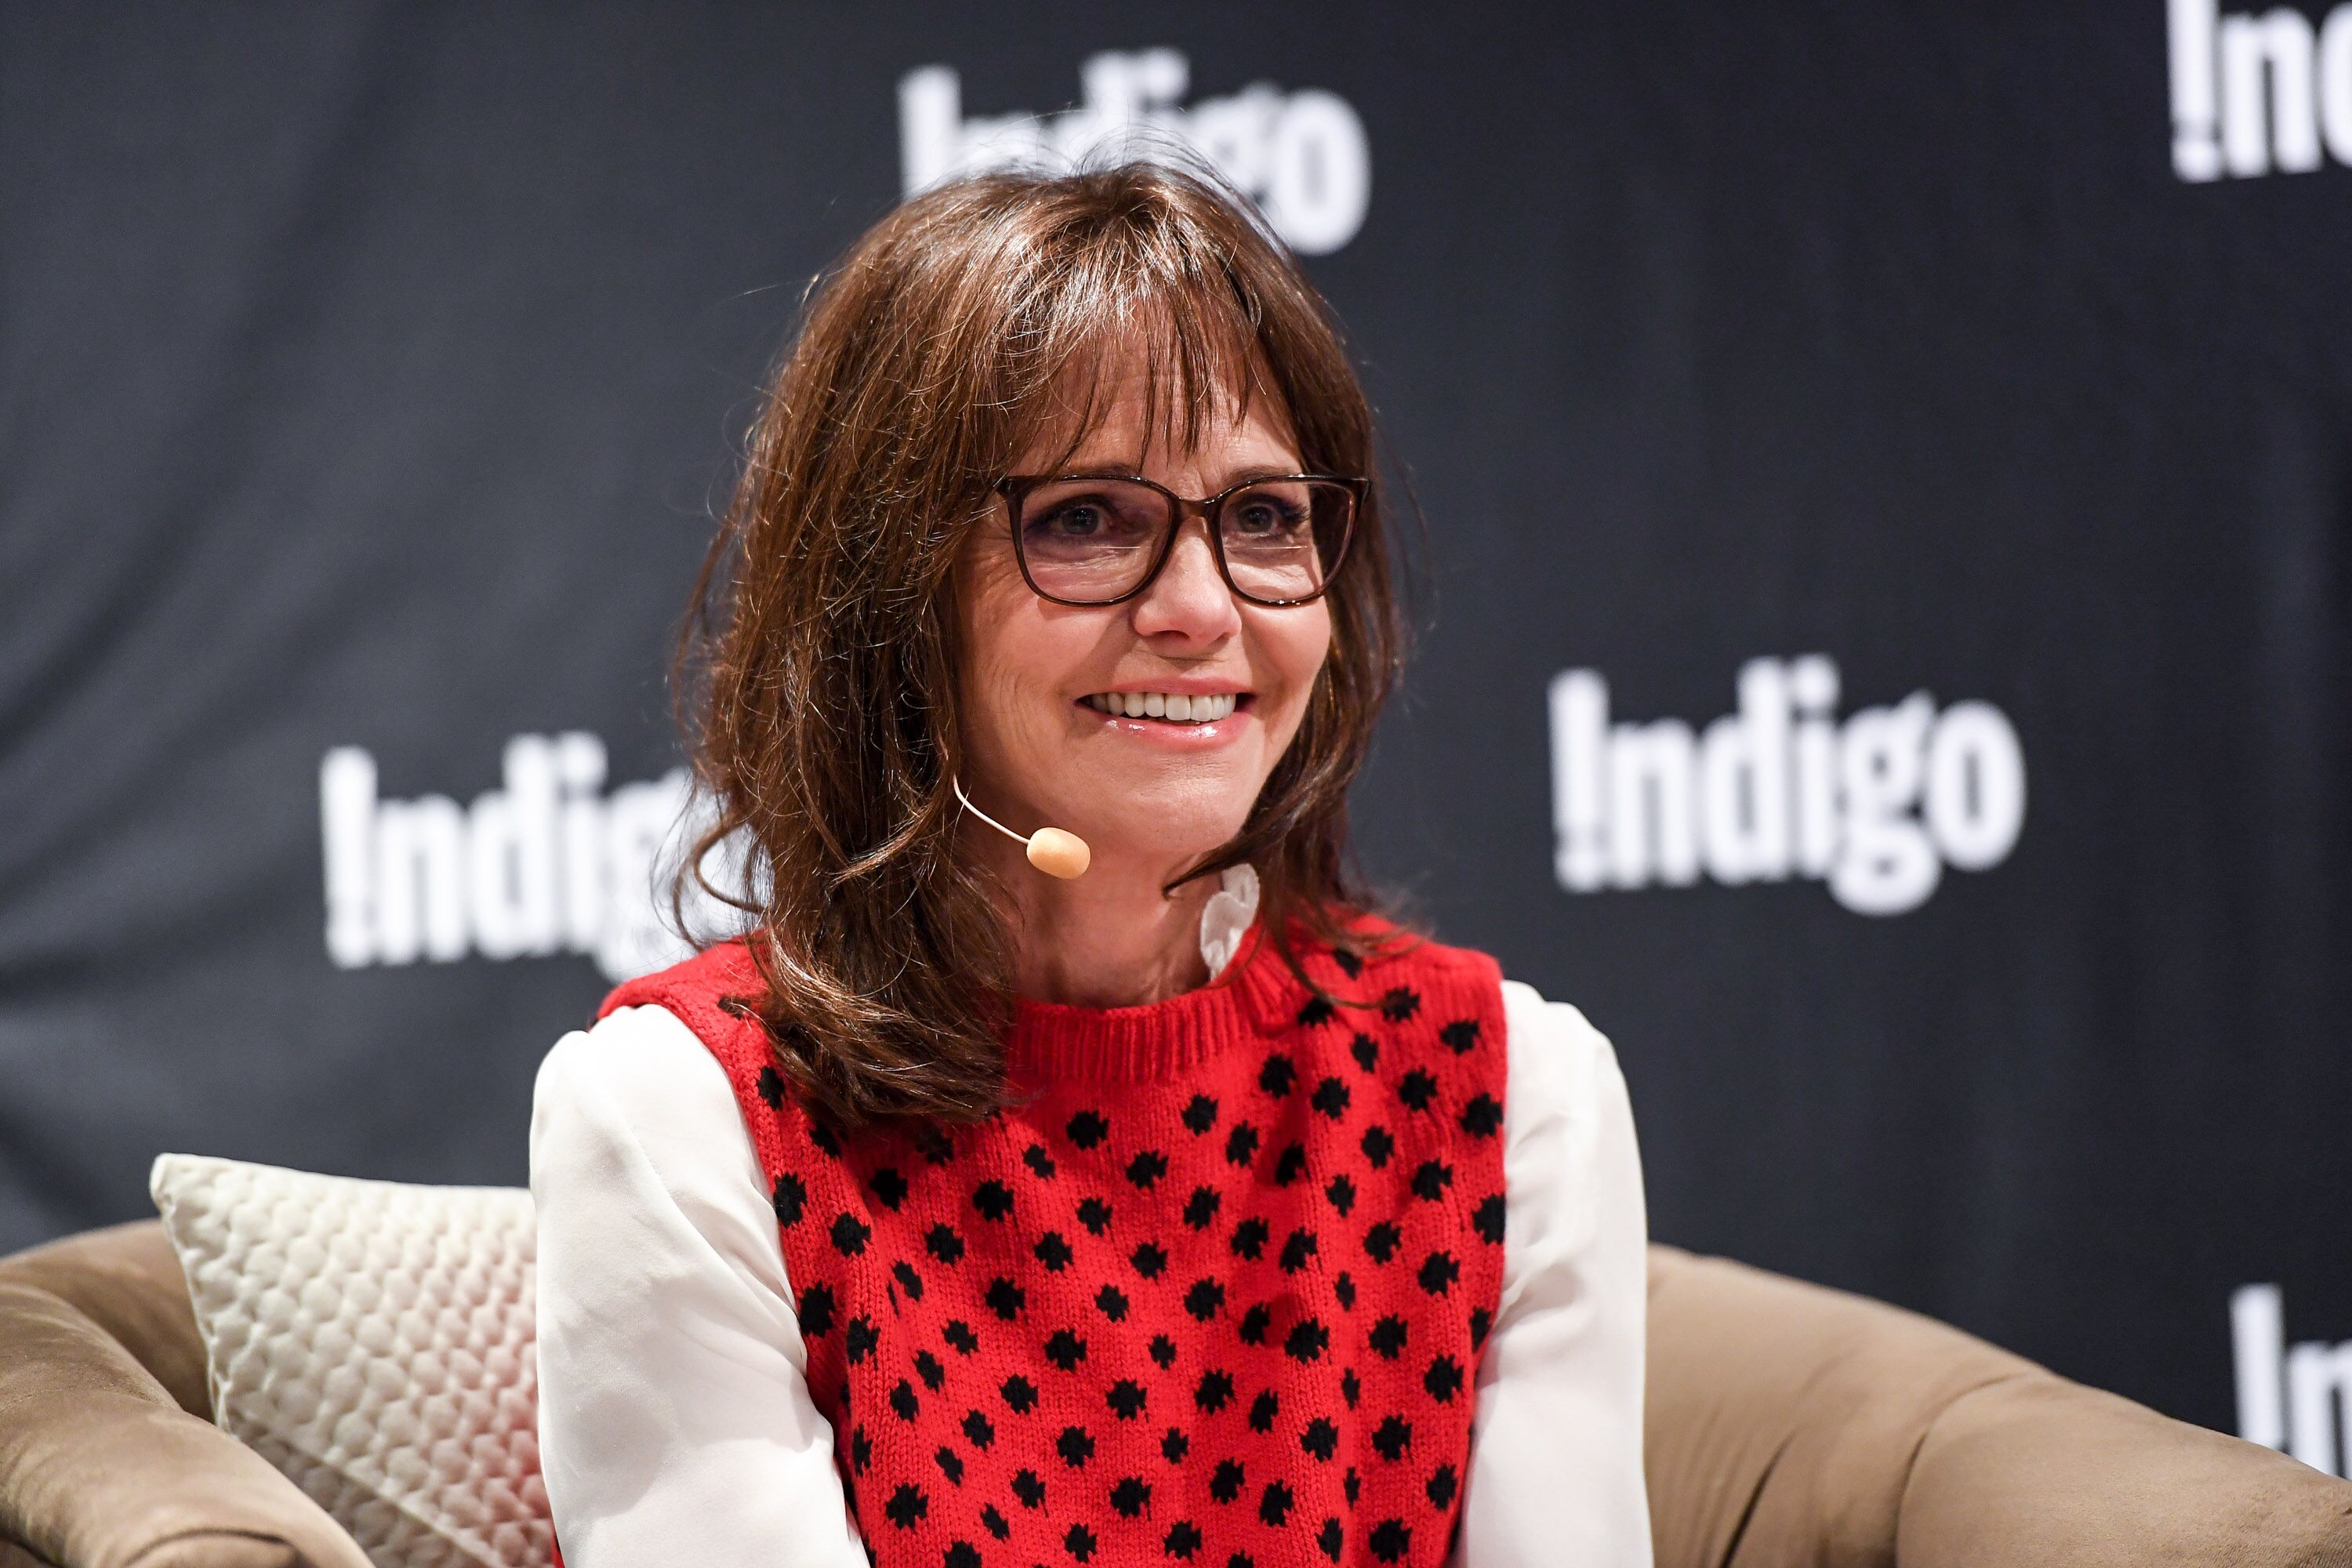 Sally Field signs copies of her new book "In Pieces" at Indigo Bay & Bloor on October 9, 2018 in Toronto, Canada. | Photo: Getty Images